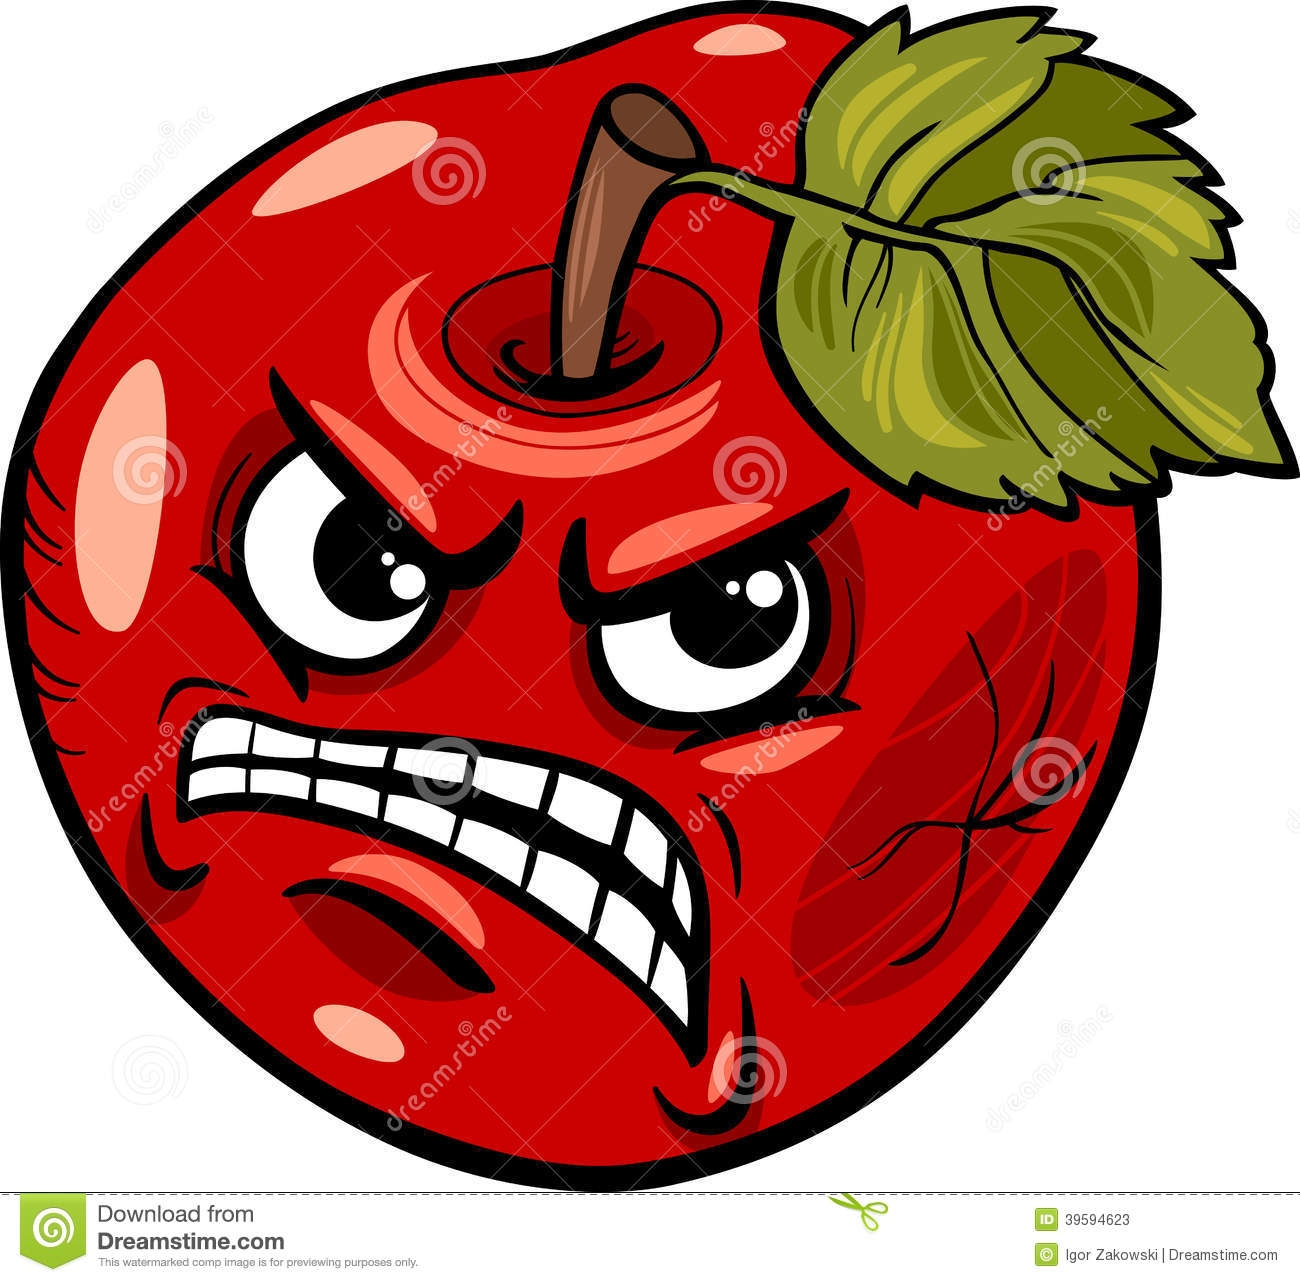 Apple clipart angry, Apple angry Transparent FREE for download on ...